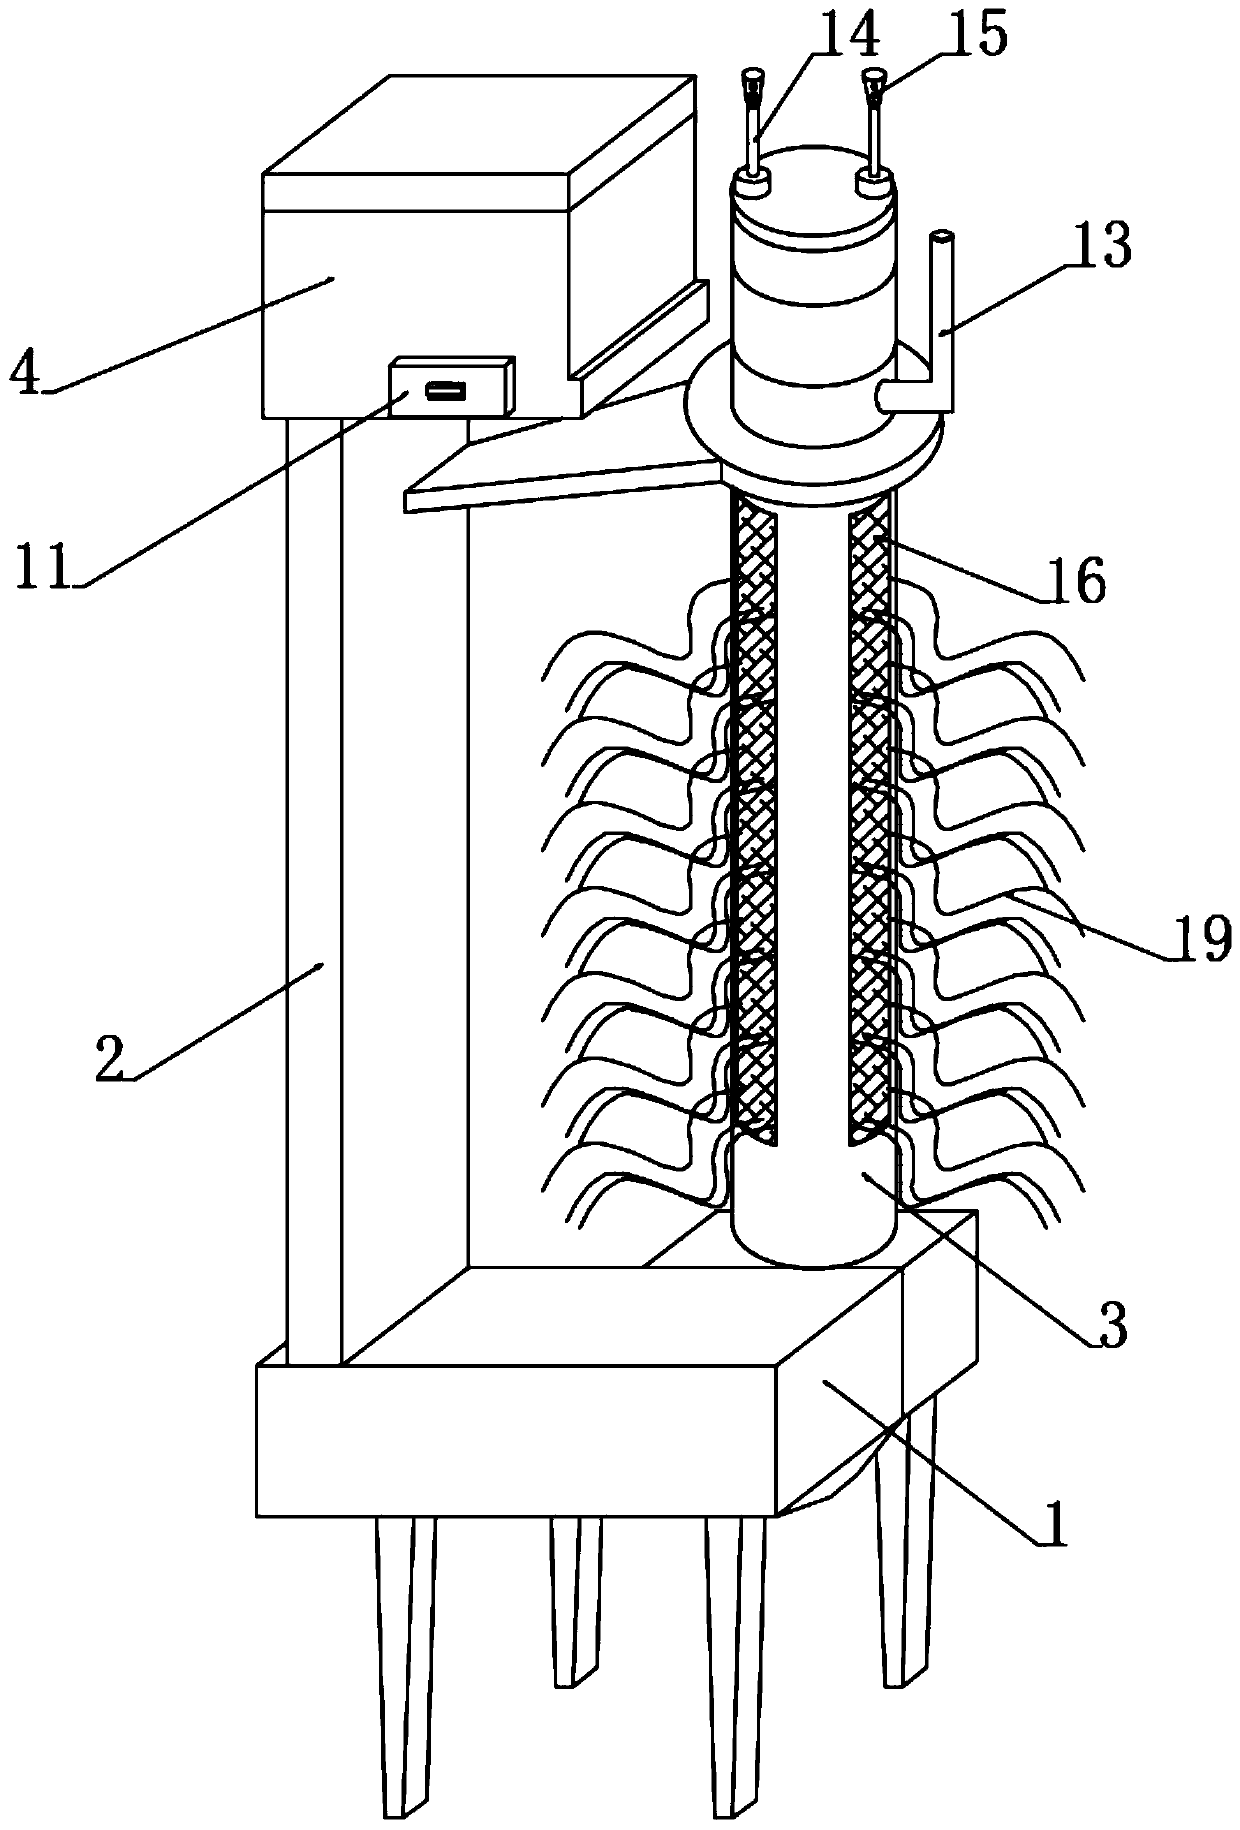 Embedded soil heavy metal adsorption and transfer device